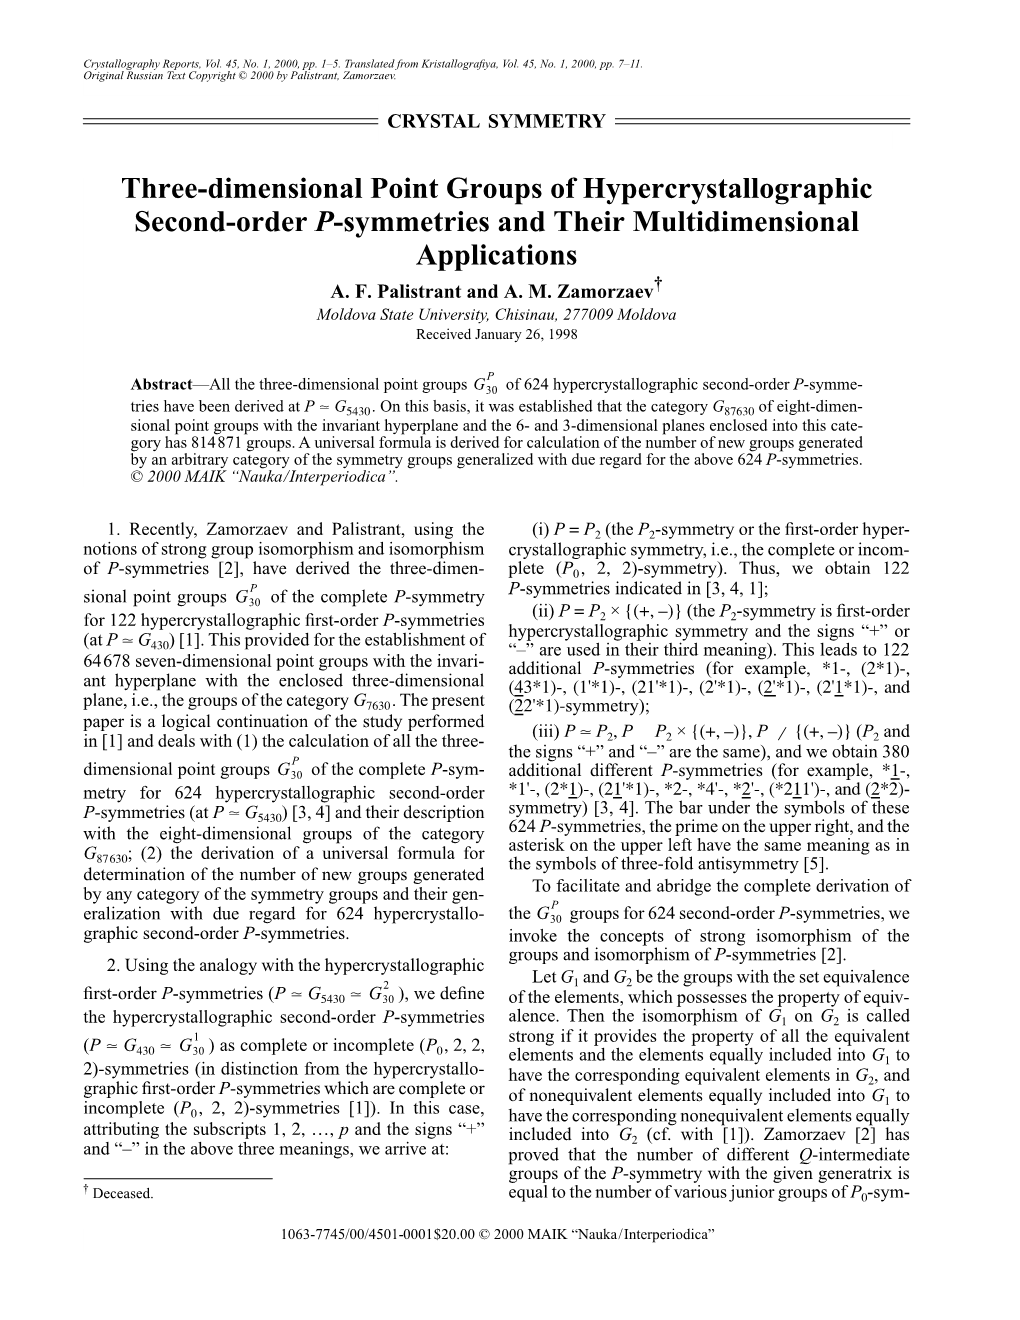 Three-Dimensional Point Groups of Hypercrystallographic Second-Order P-Symmetries and Their Multidimensional Applications A